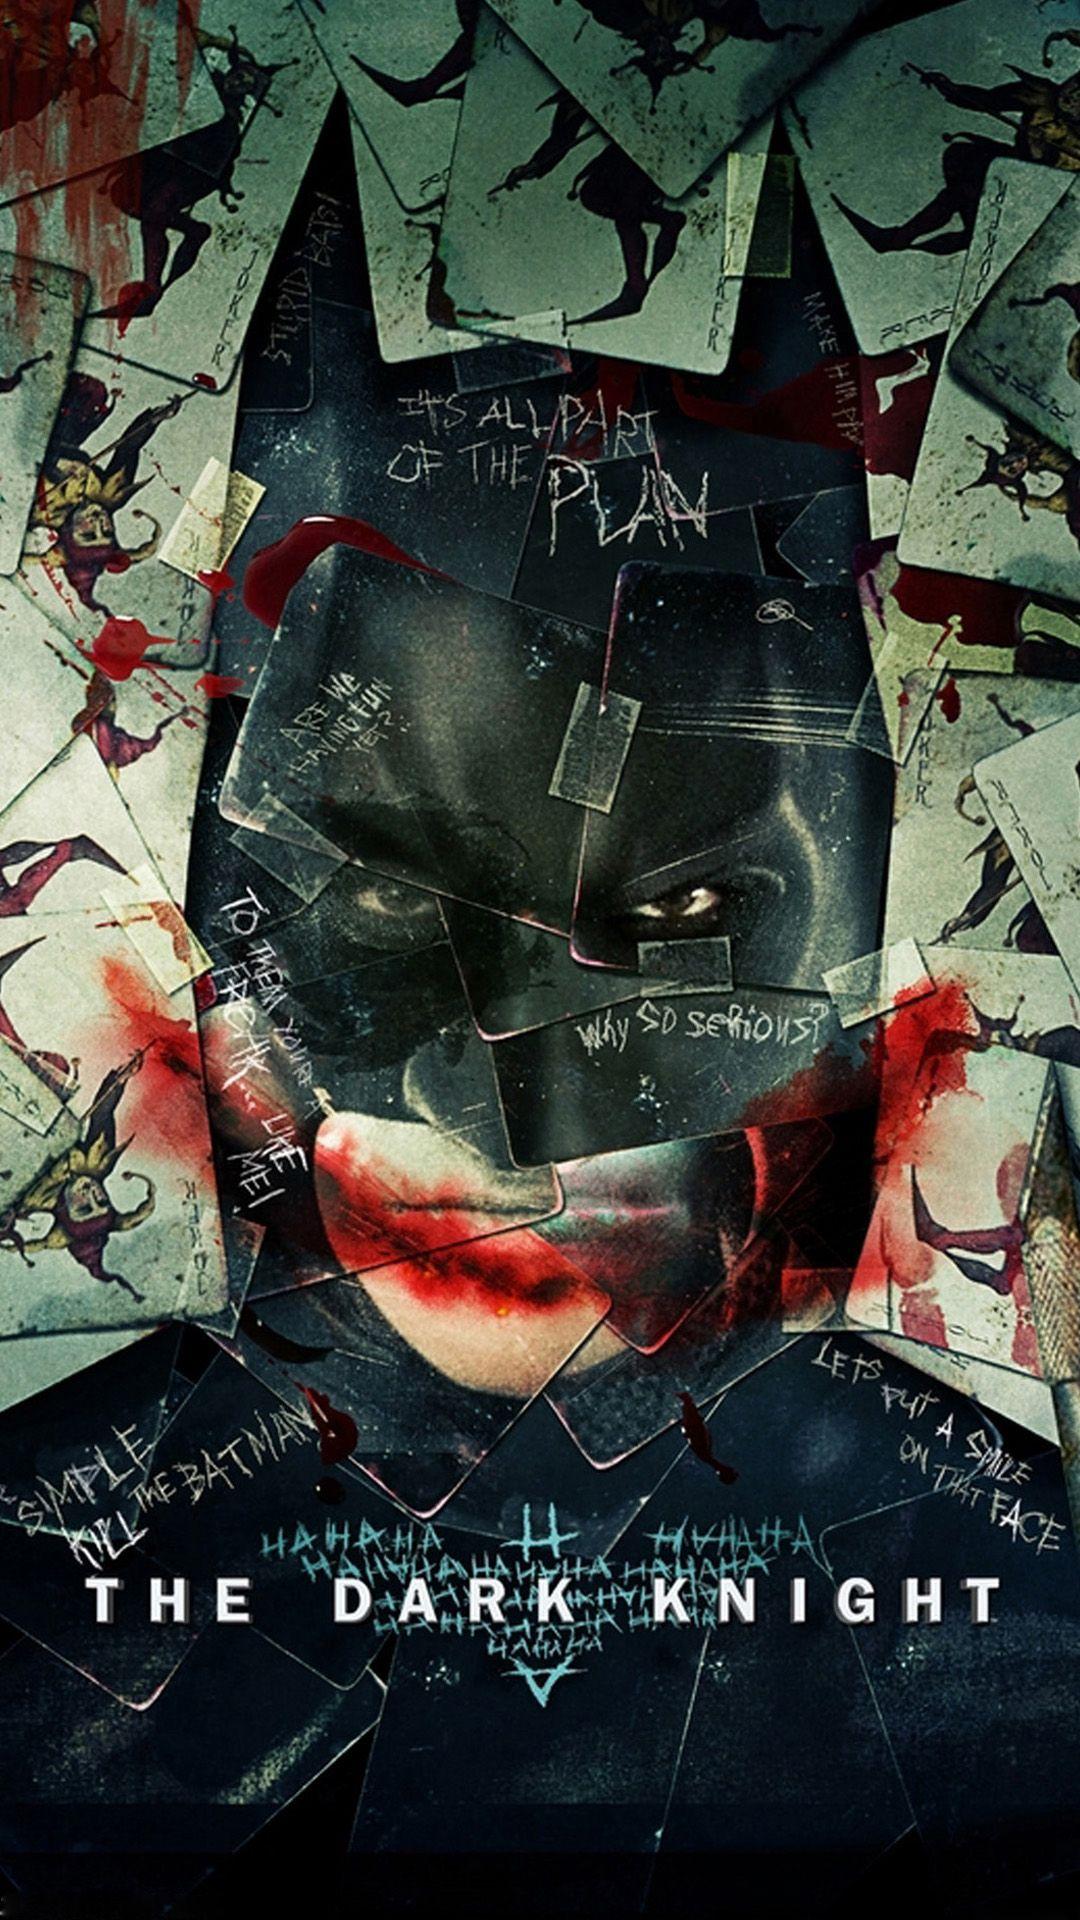 Dark Knight cards htc one wallpaper, free and easy to download